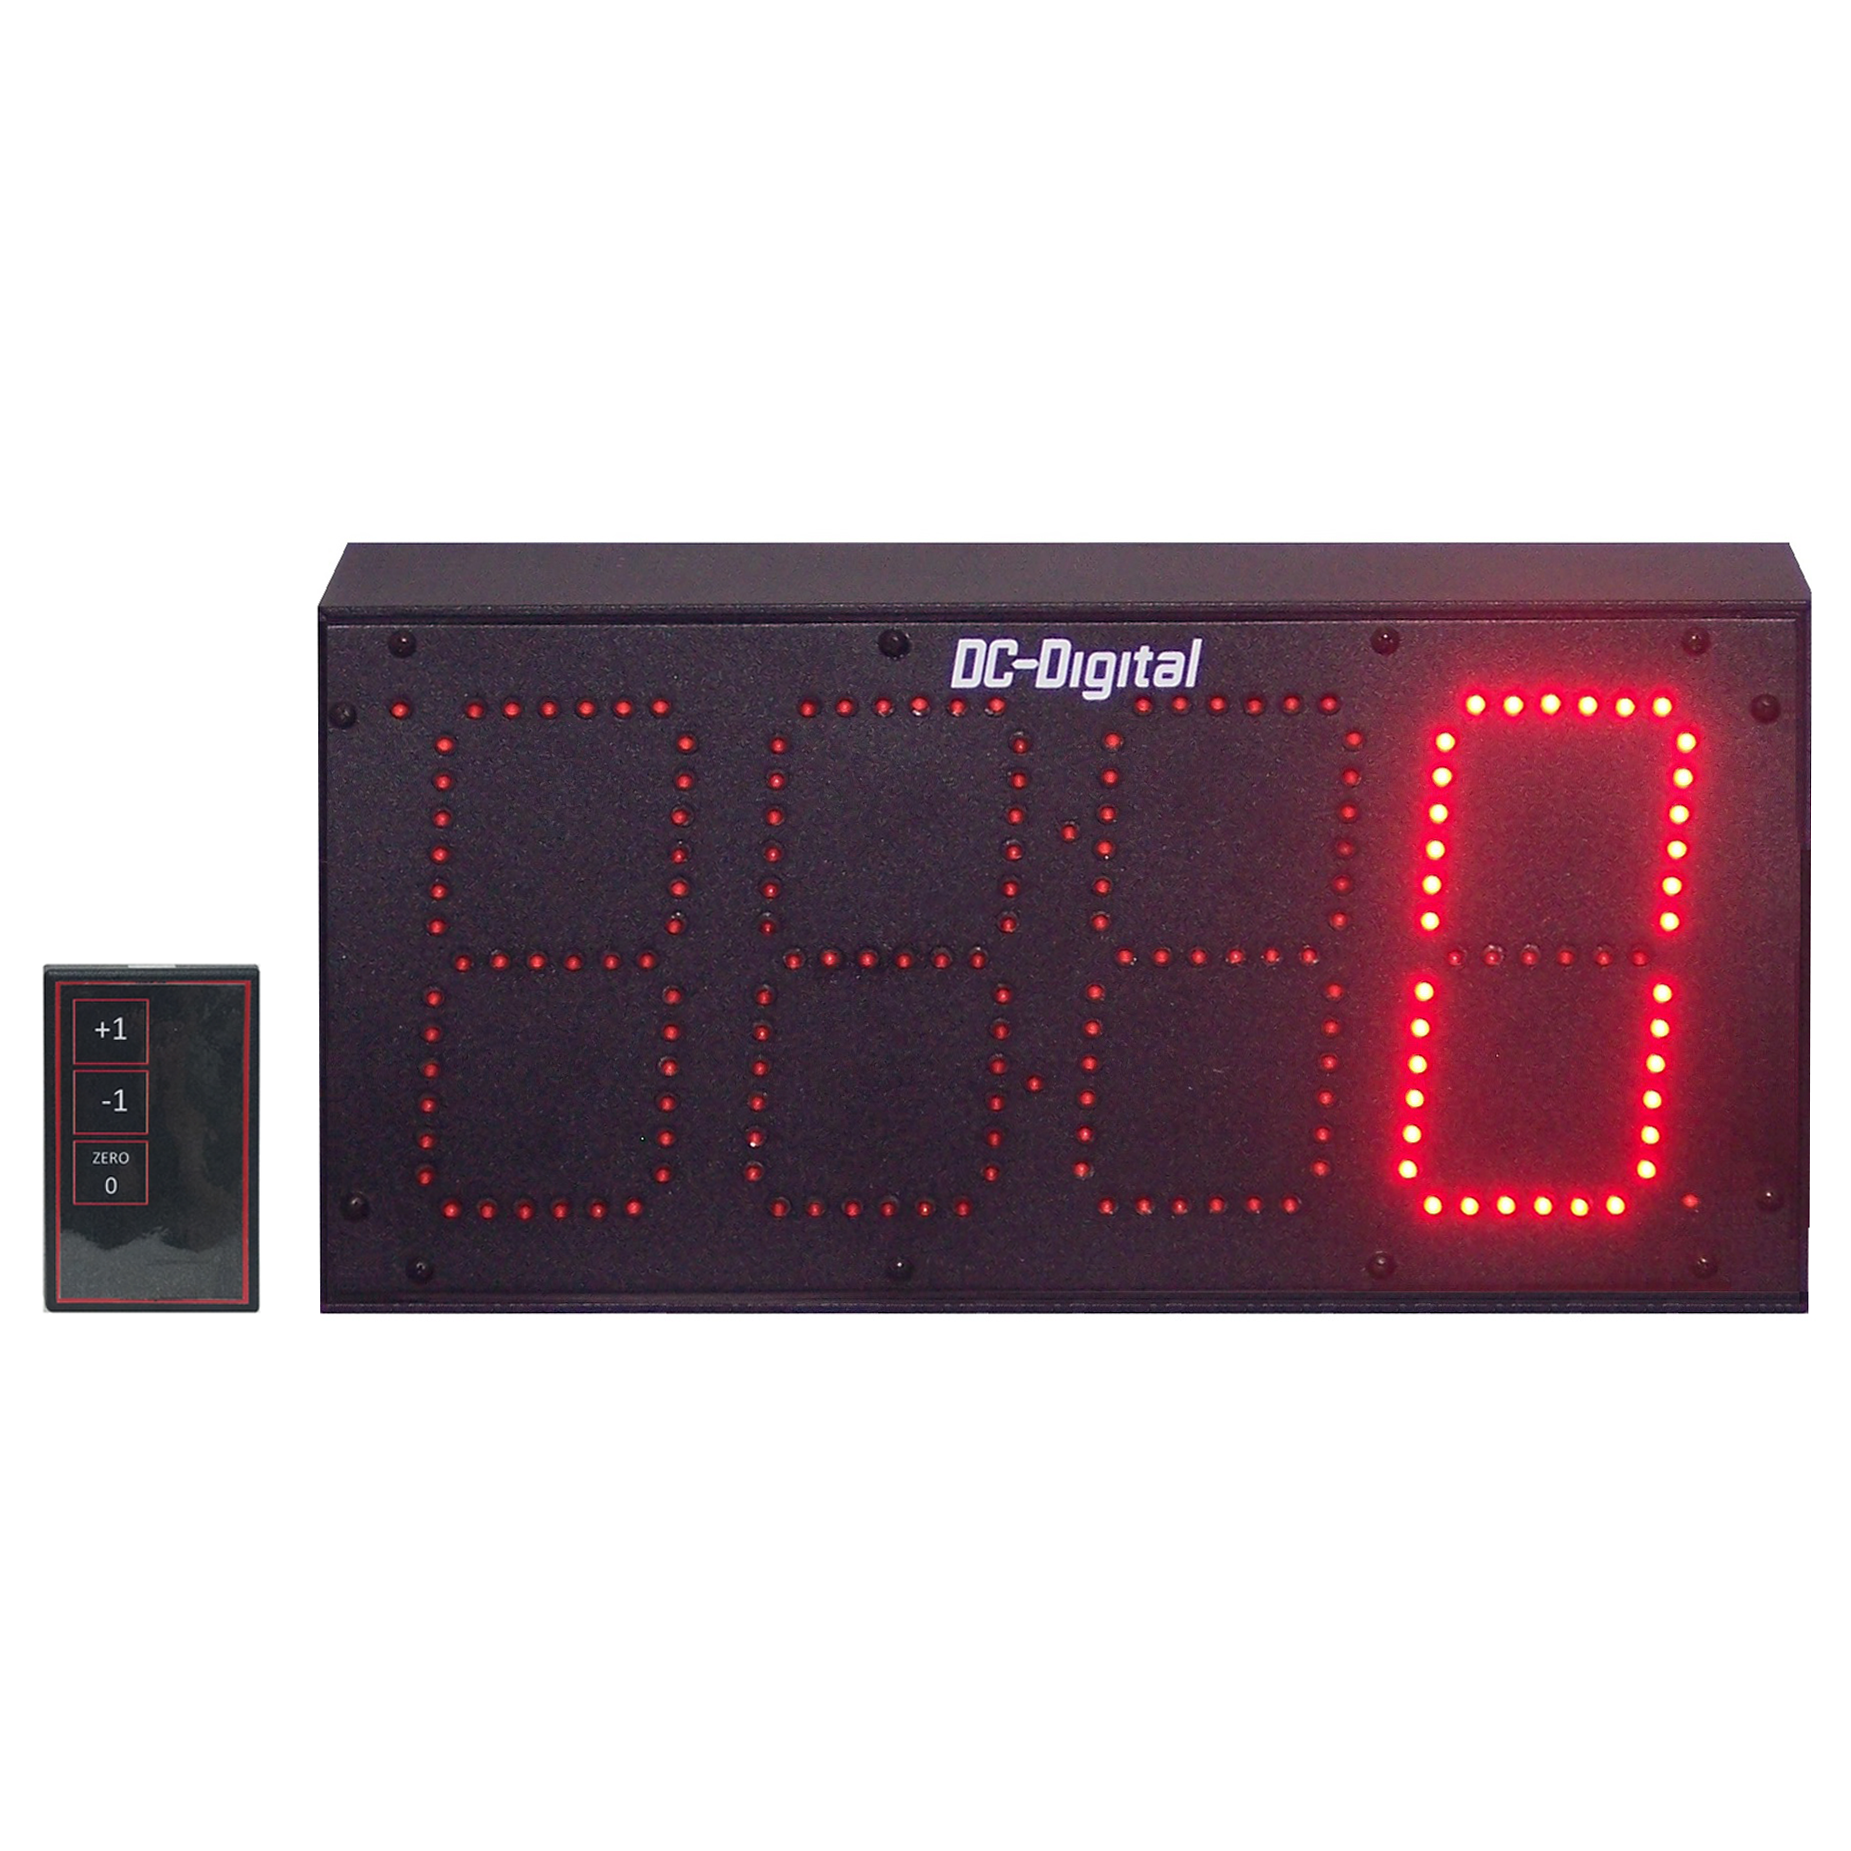 (DC-60T-UP-DAYS-W) 6.0 Inch LED Digit, RF-Wireless Remote Handheld Controlled, Count Up by Days Timer (OUTDOOR)